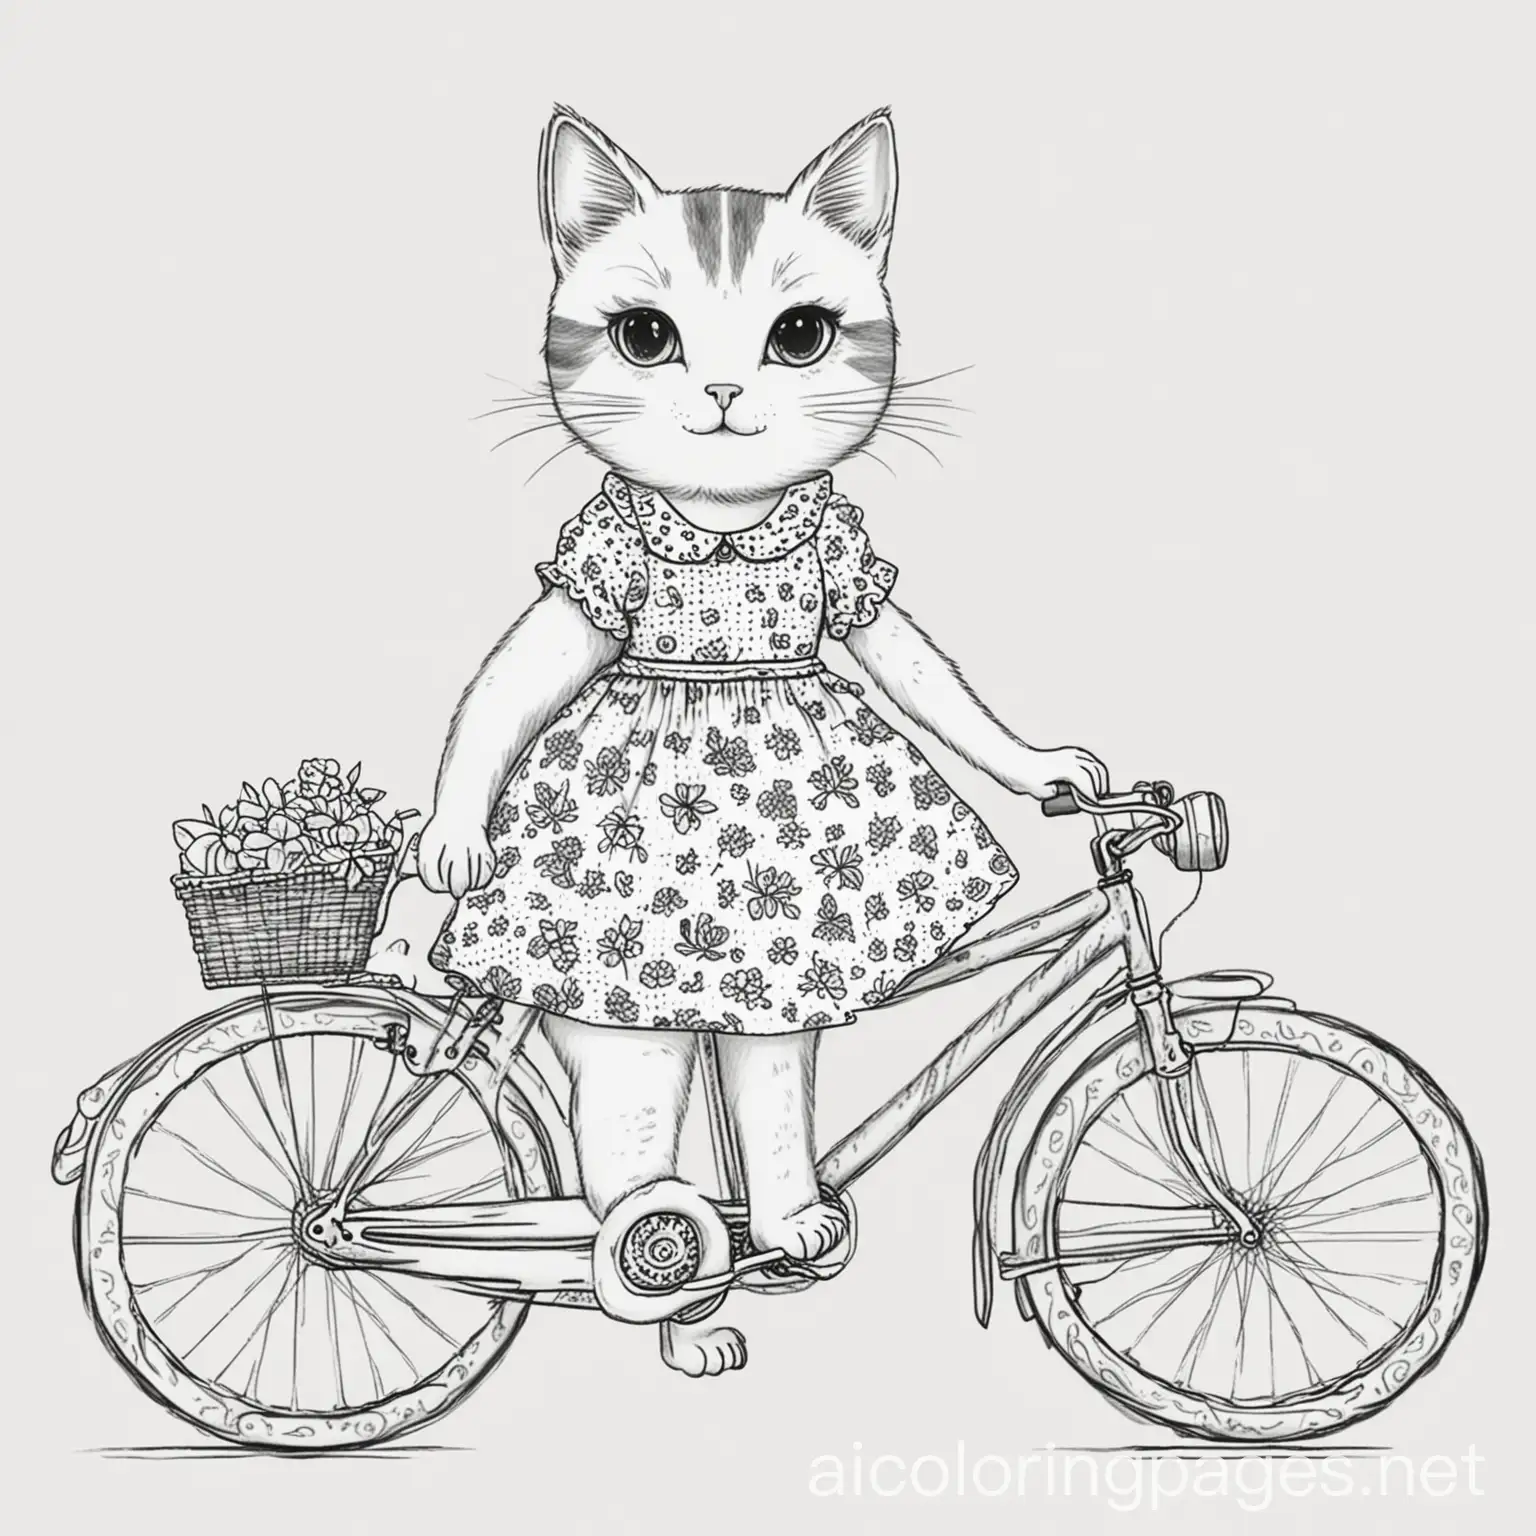 A pretty female cat riding a bicycle wearing a cute dress, Coloring Page, black and white, line art, white background, Simplicity, Ample White Space.